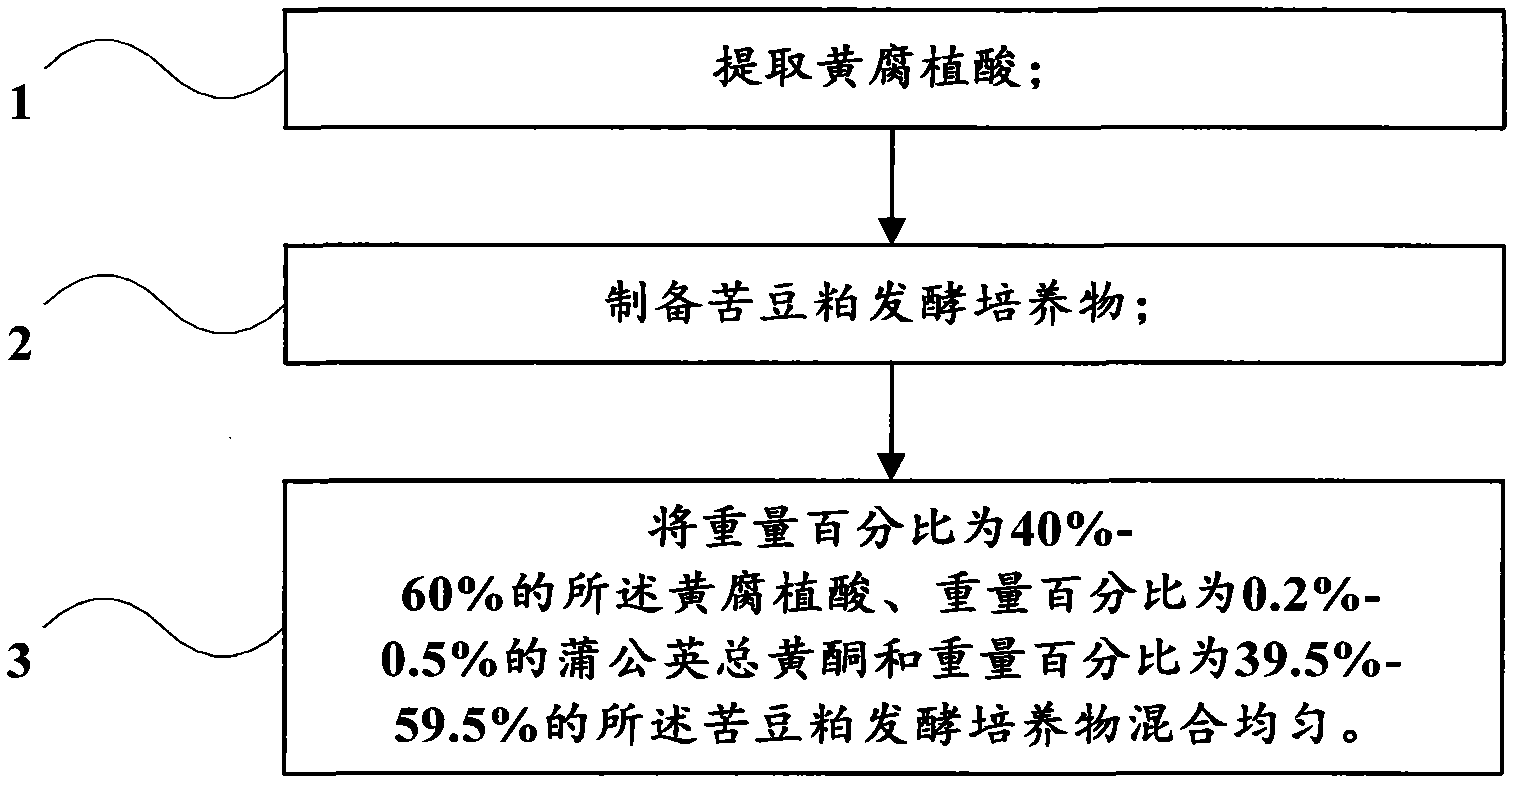 Special animal nutrient for milk cows and preparation method thereof